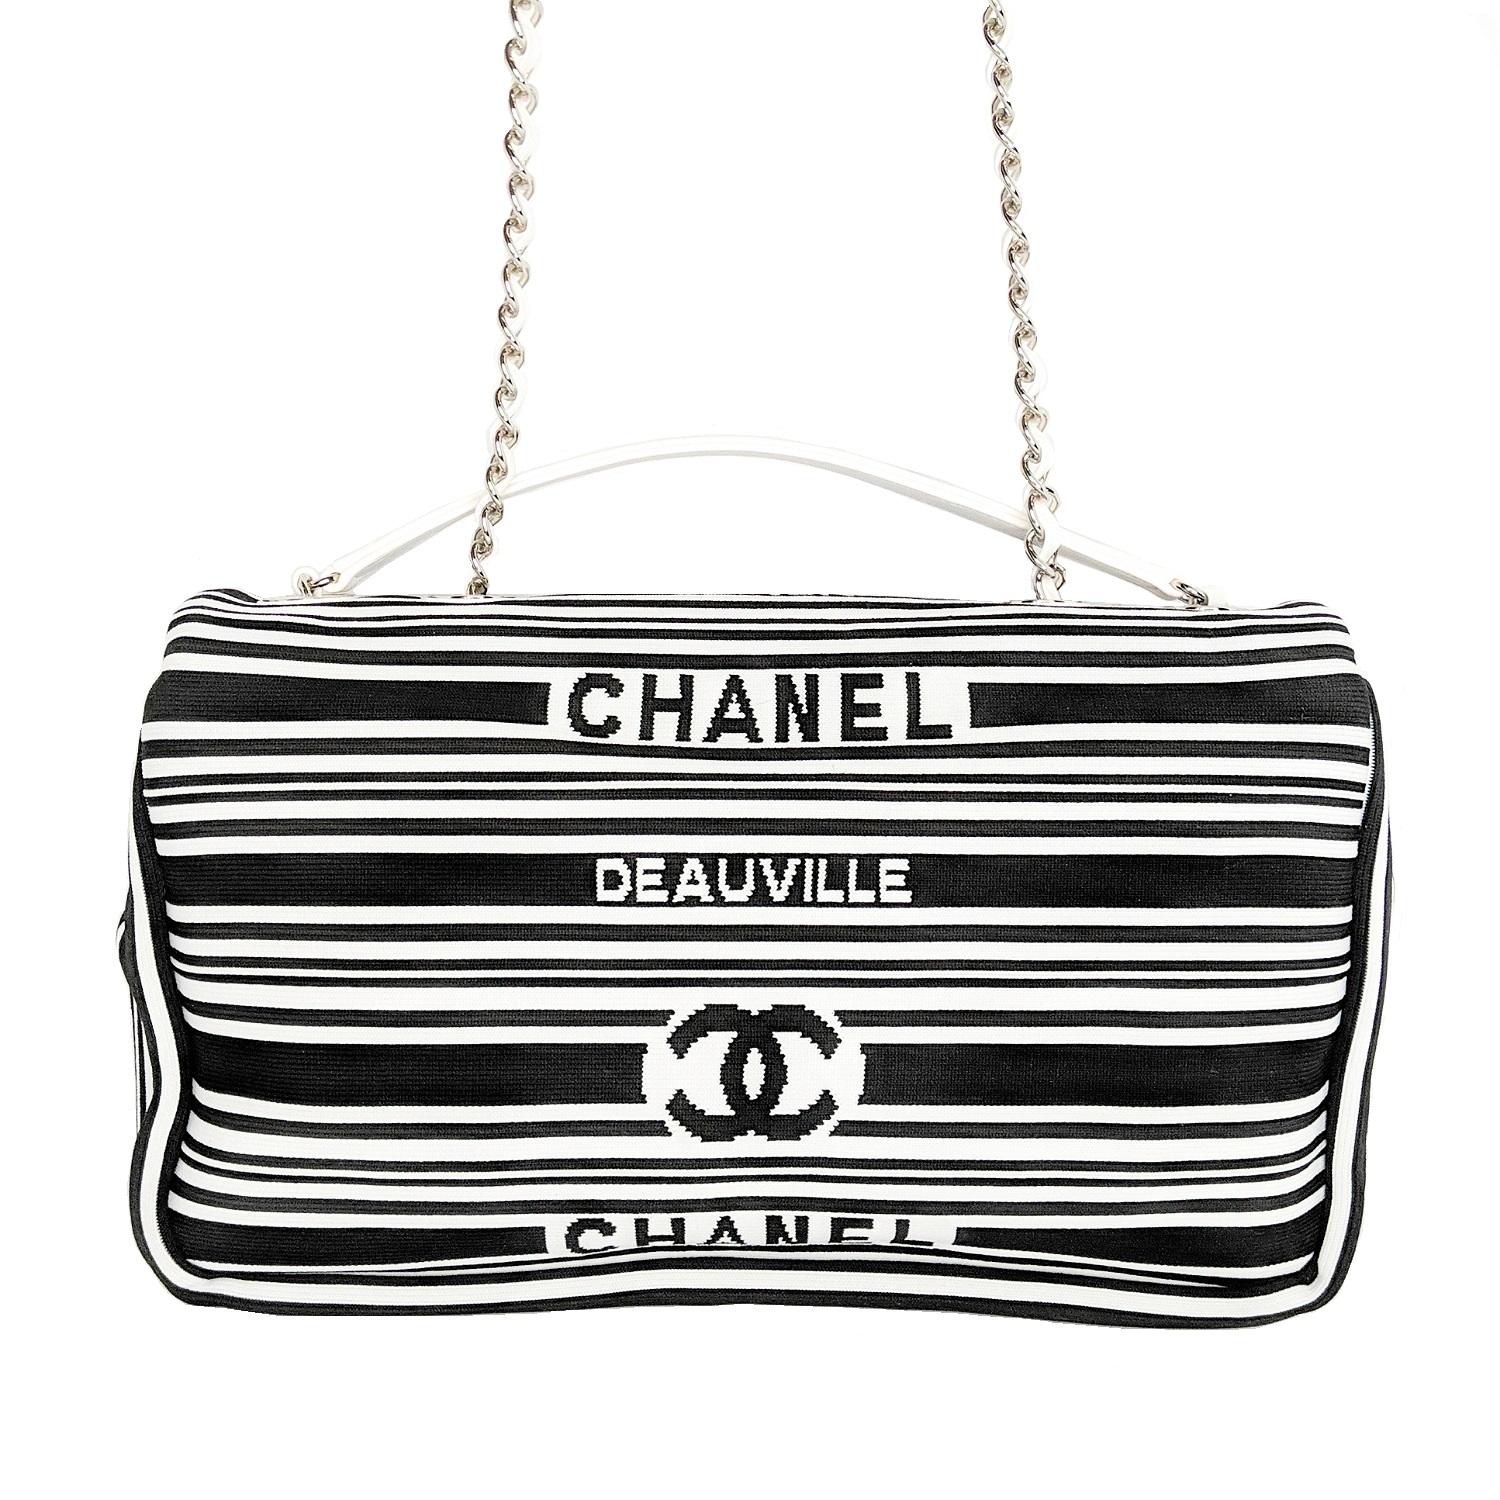 From the 2019 Collection. White and black striped woven Chanel Venise Biarritz bag with silver-tone hardware, white leather trim, chain-link and leather shoulder strap with shoulder pad, logo accents at exterior, tonal leather and textile lining,